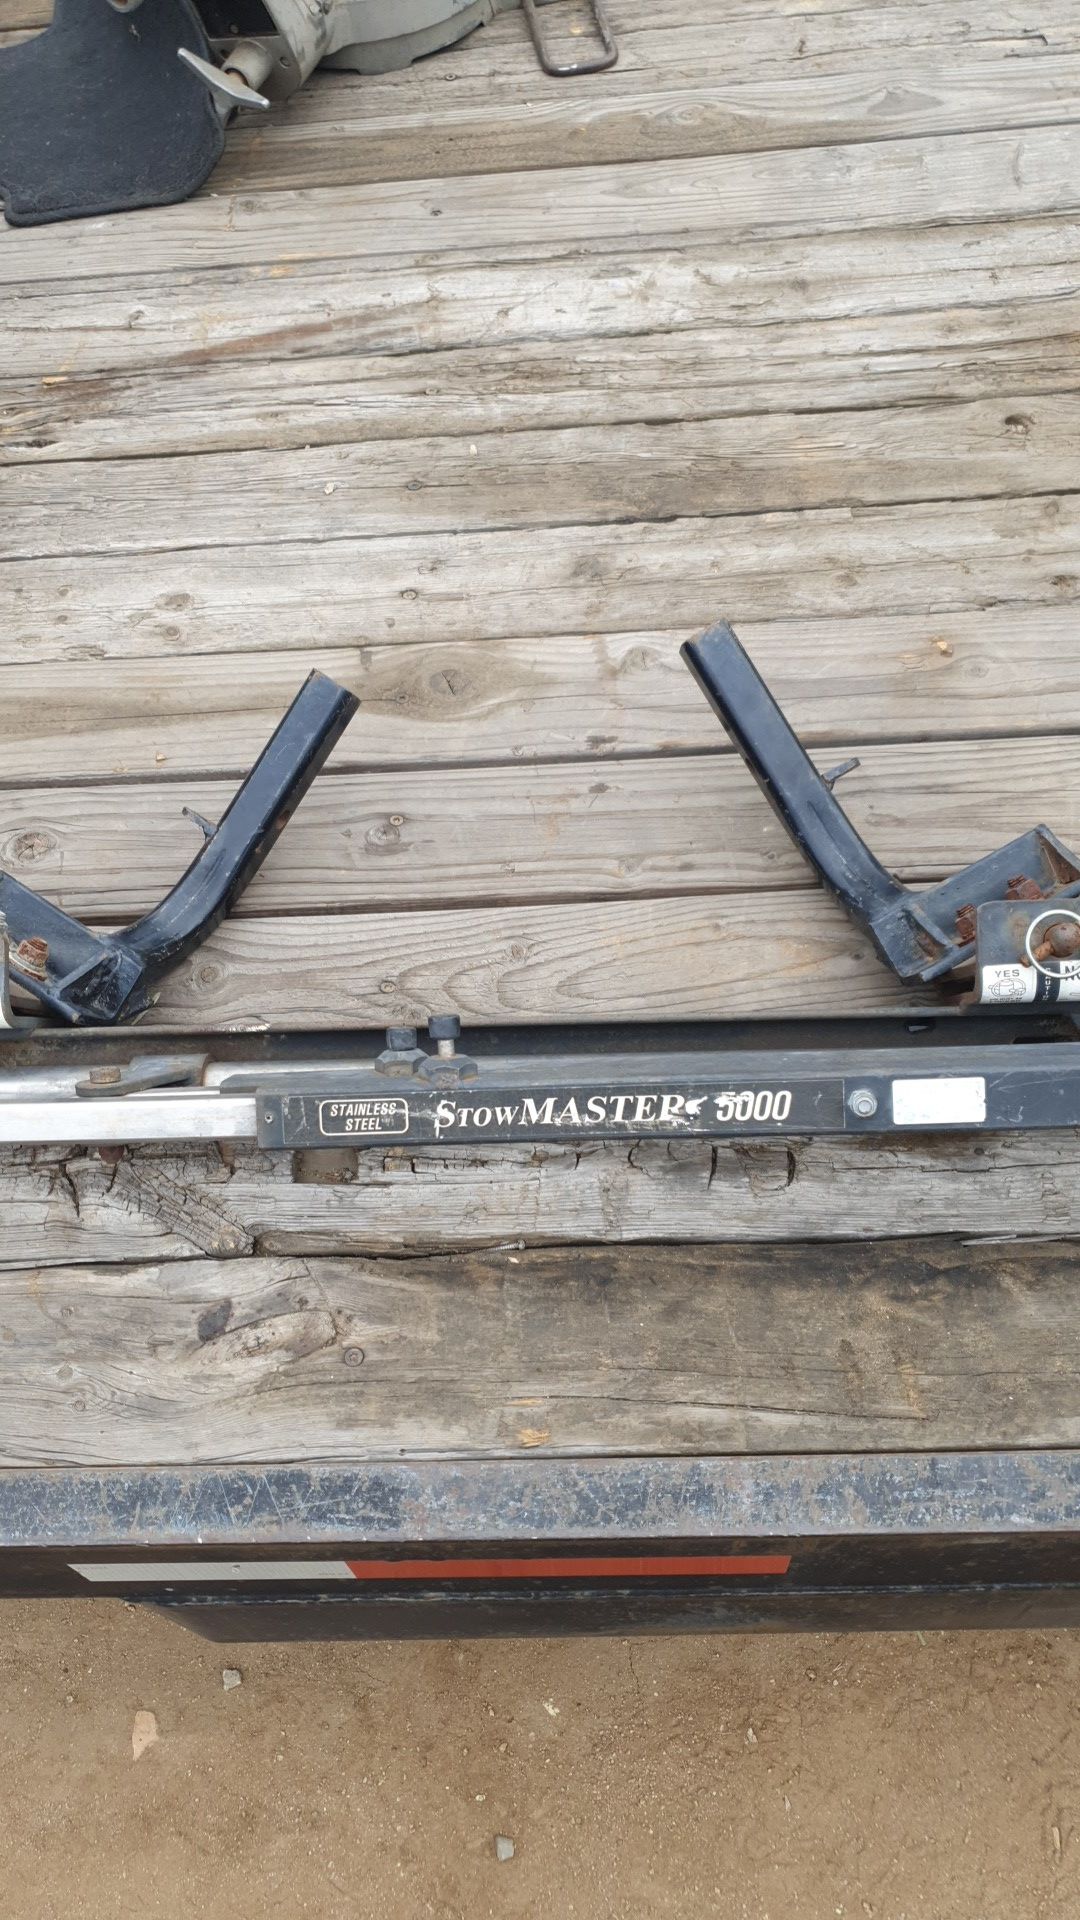 Tow hitch stowmaster 5000 heavy duty 2" ball